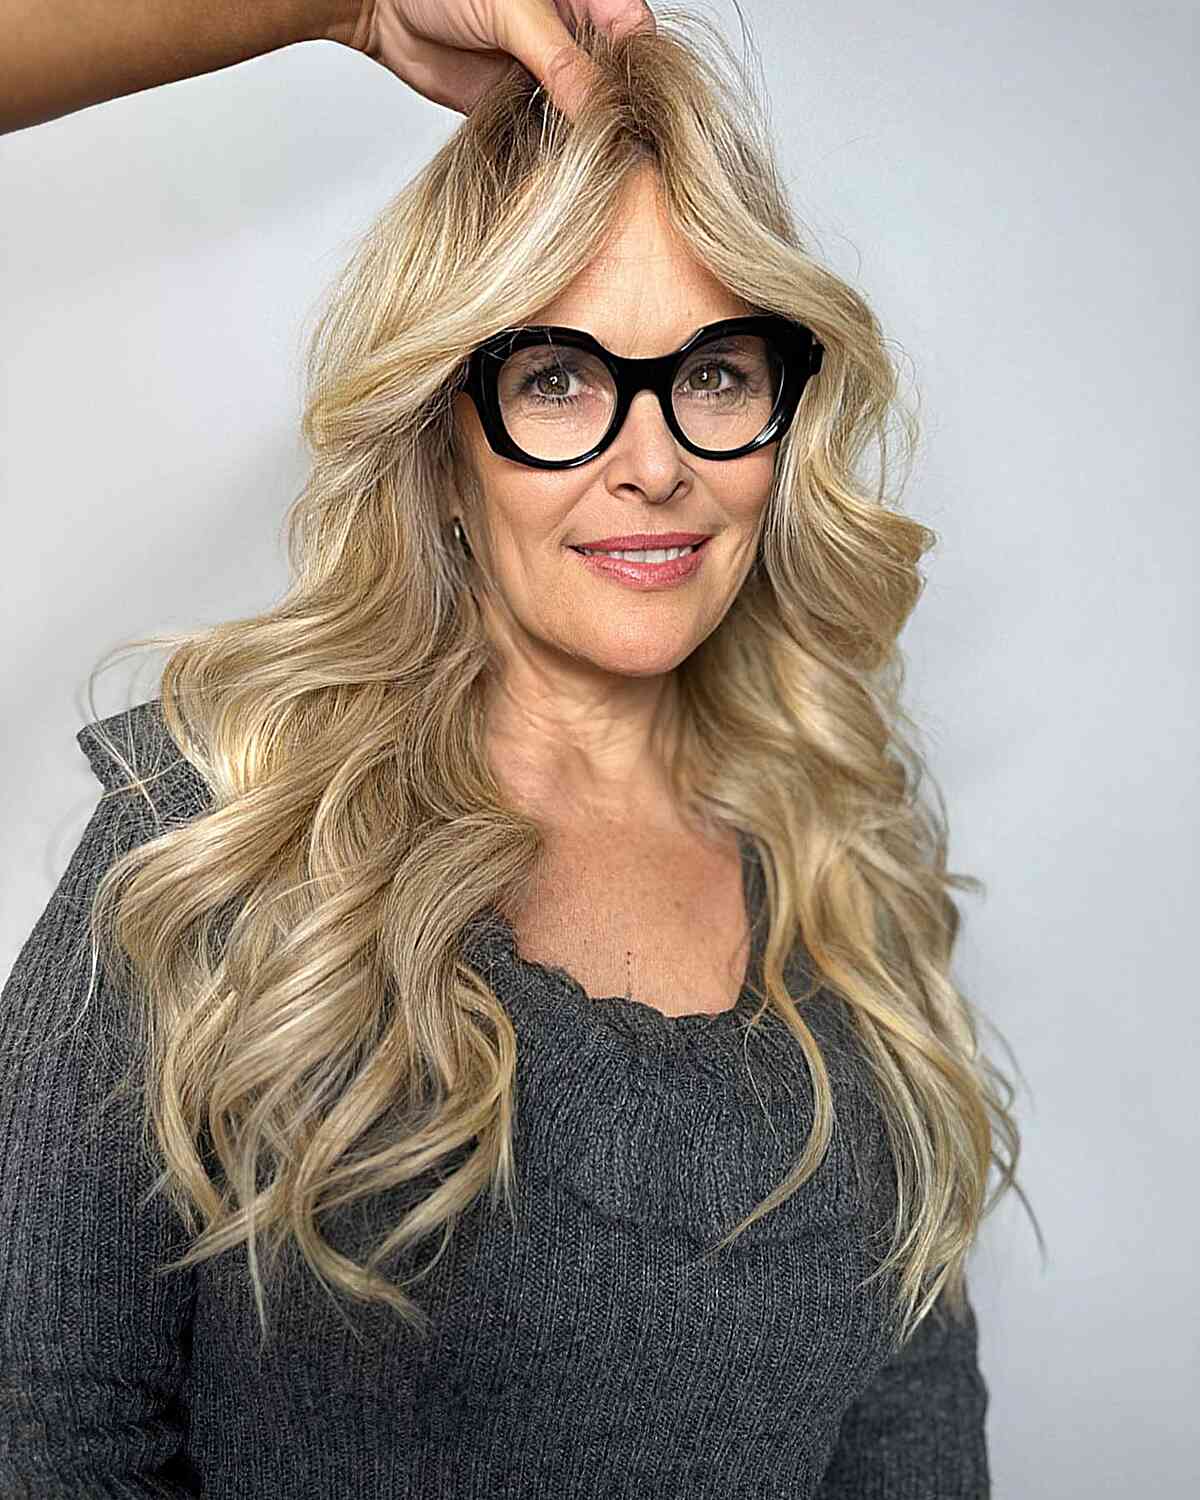 Sandy Blonde Balayage with Long Voluminous Waves for Older Women Over Sixty with Glasses